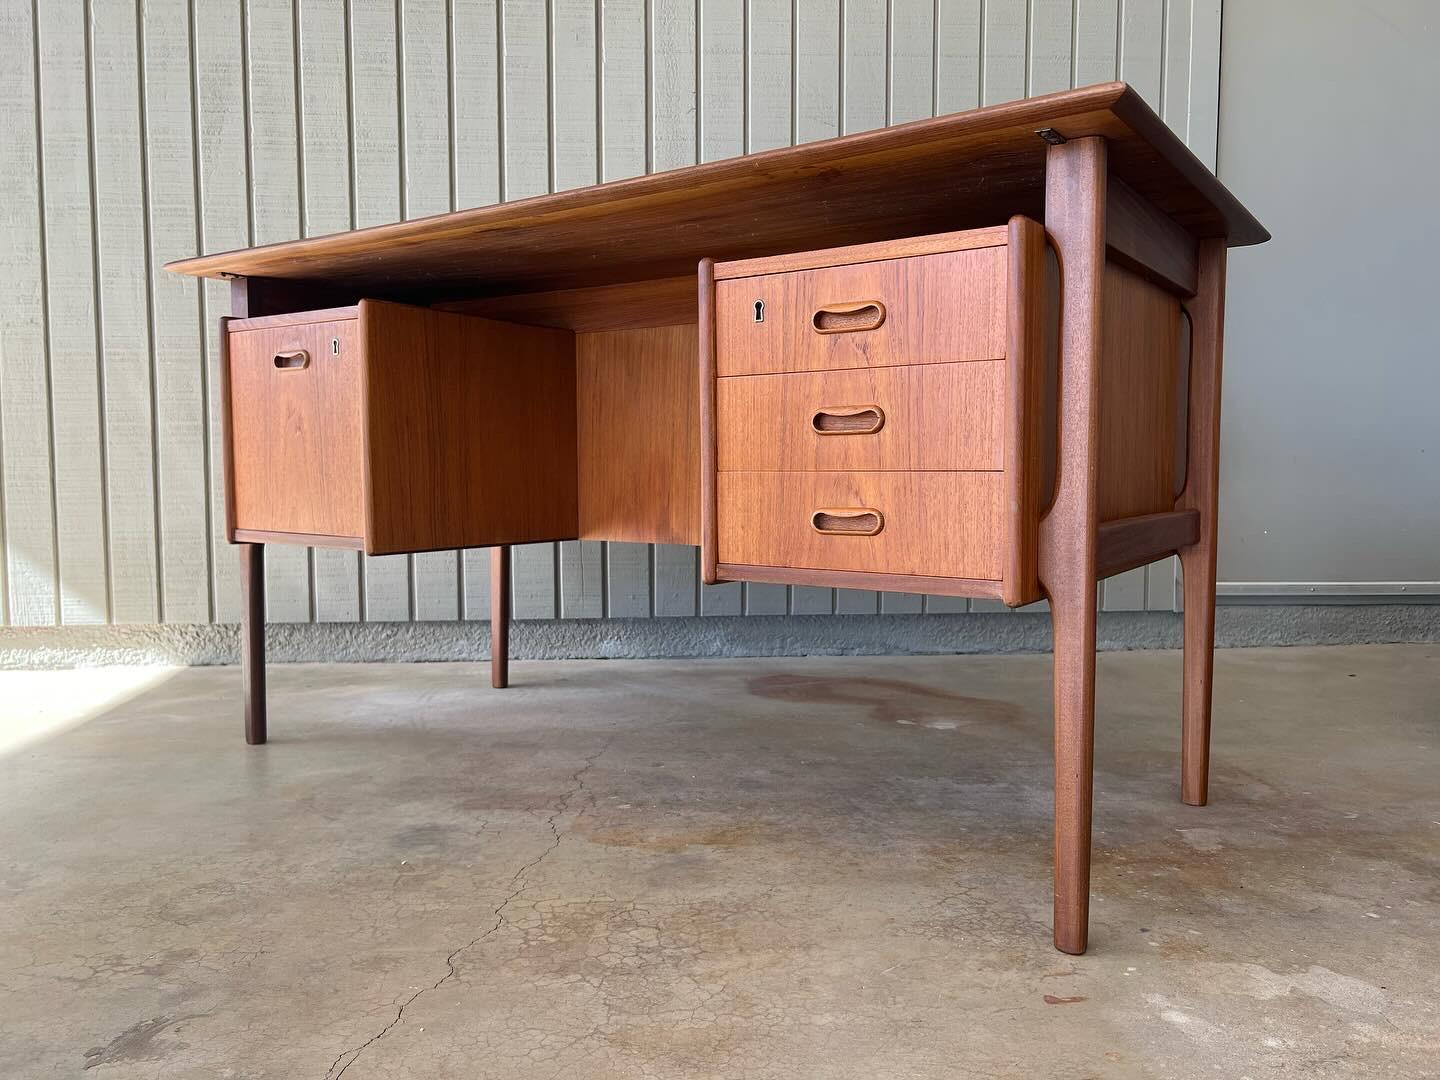 1960s Danish teak wood desk. Excellent mid century modern floating style with sculptural legs and handles. Features three drawers on the right and a filing drawer on the left. There is also a fold down tray on the back along with two cabinet spaces,